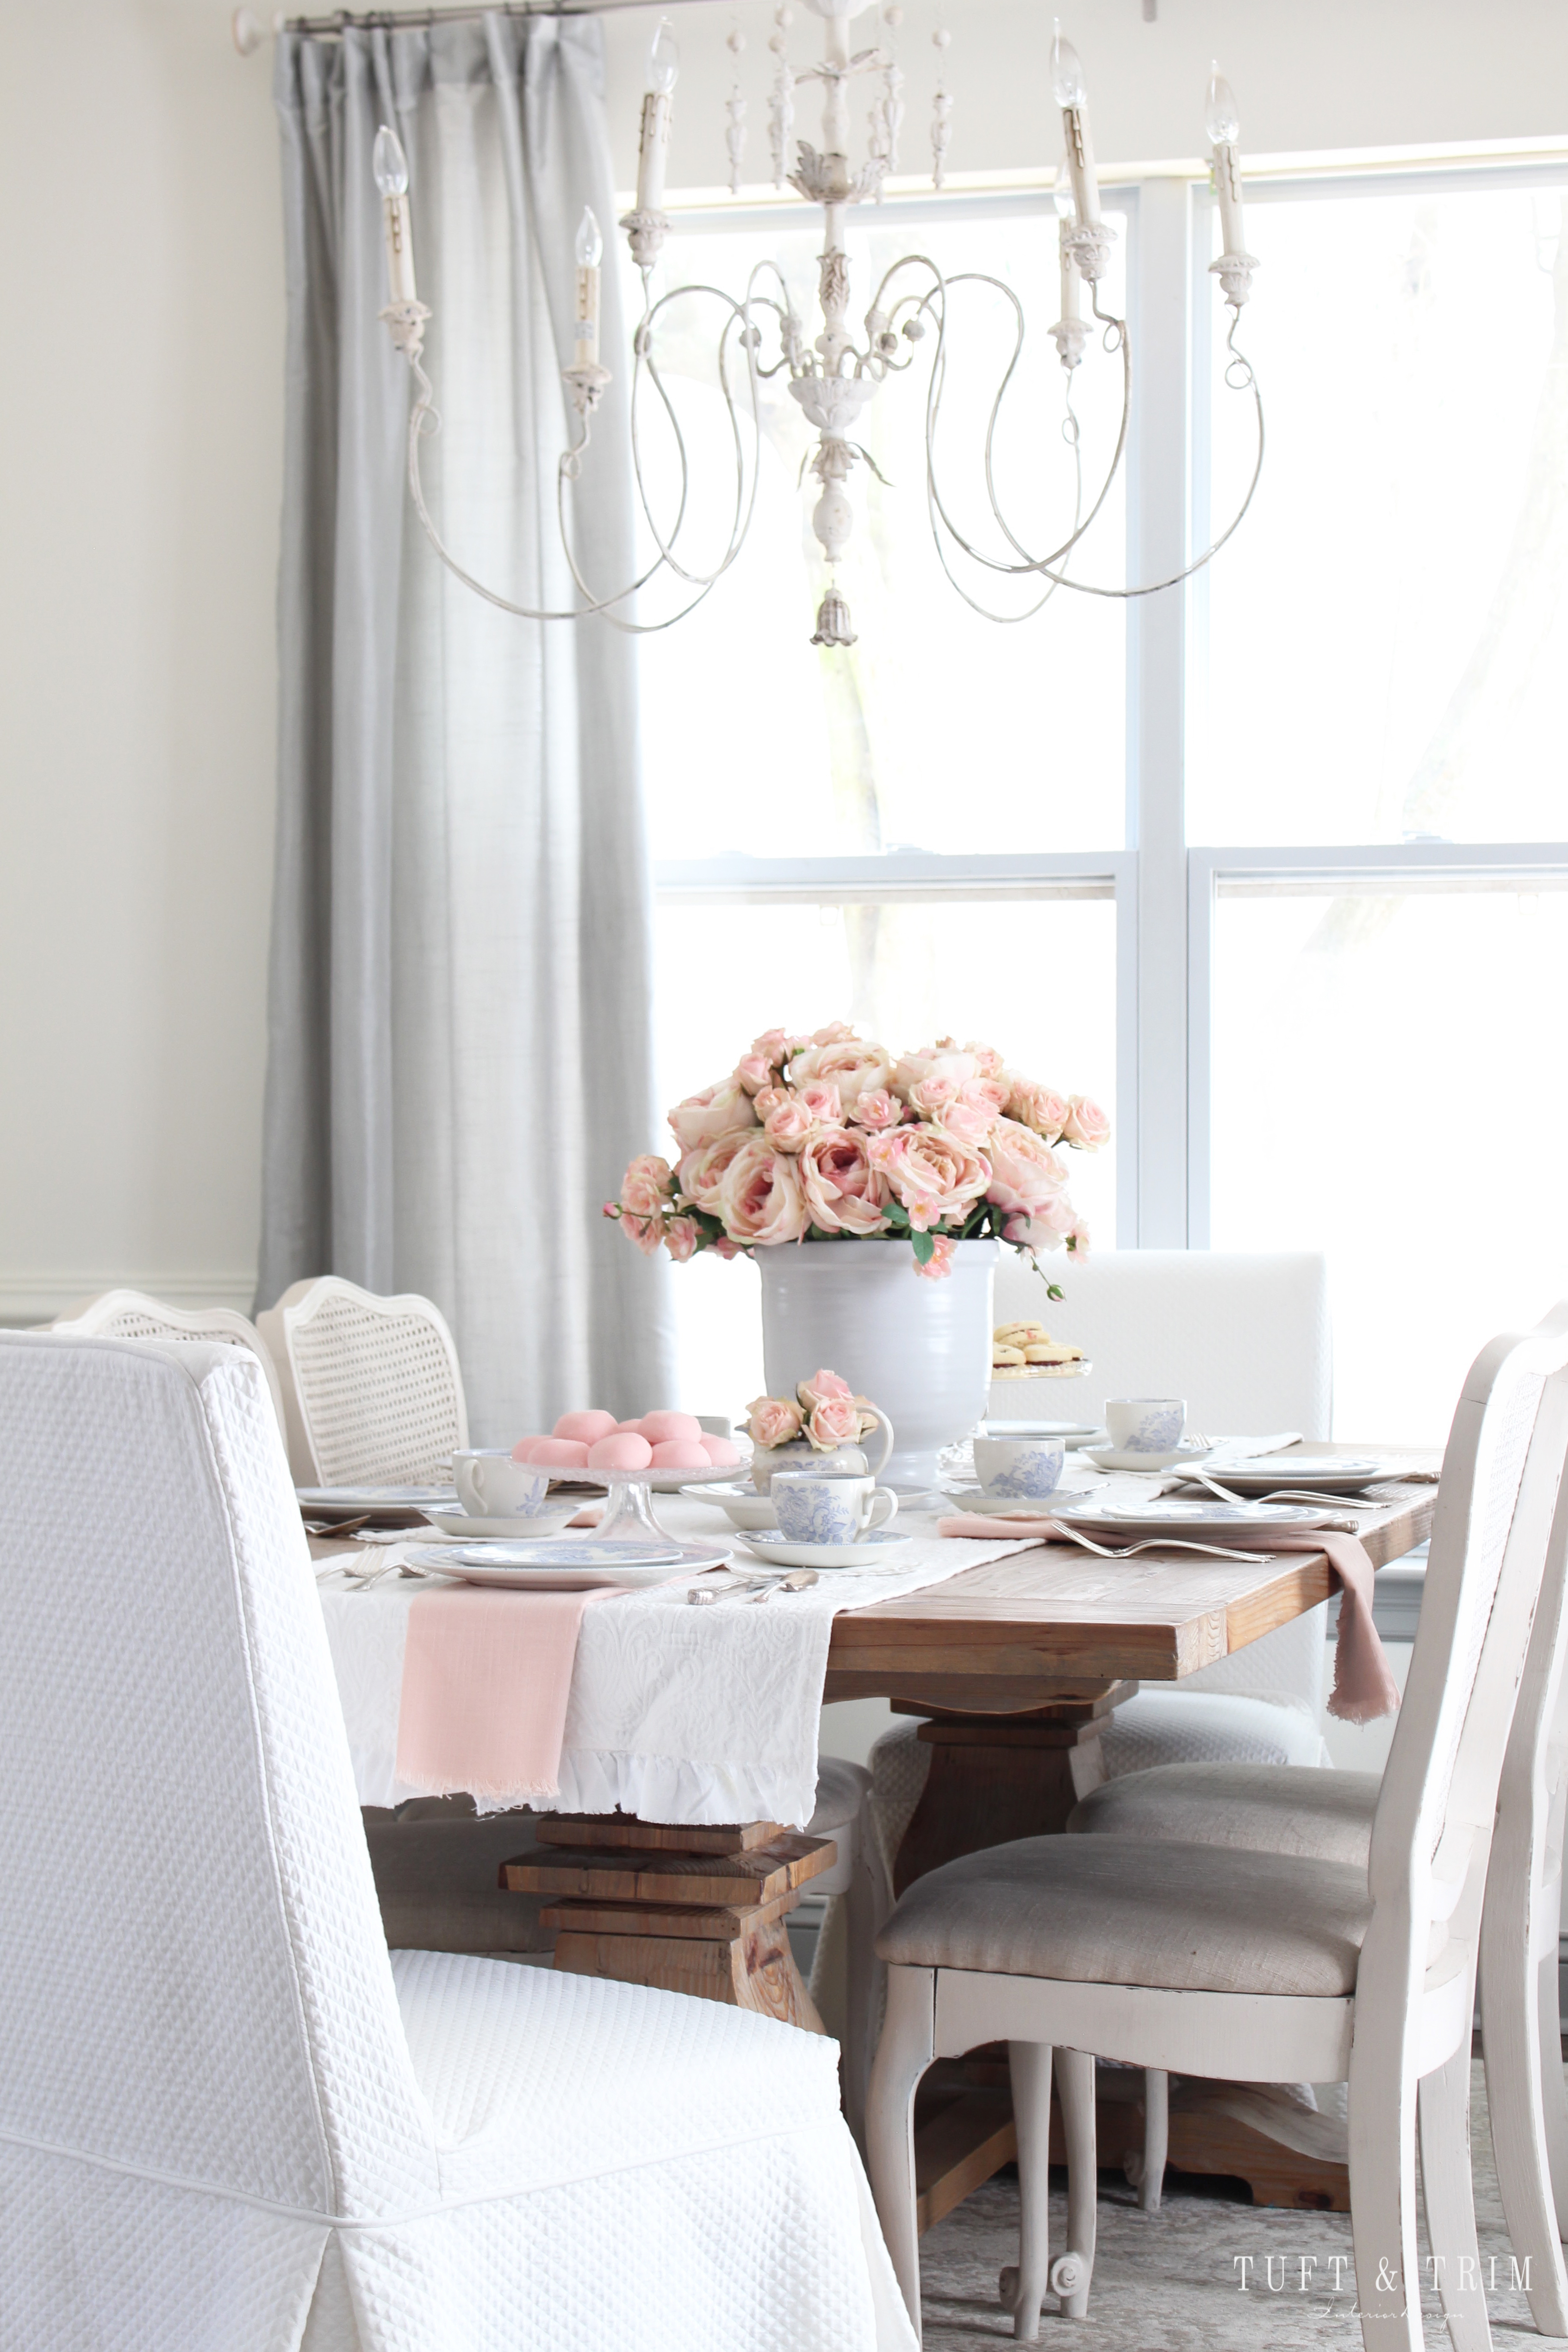 Blue and White Valentine's Day Table with Pink Floral- Tuft & Trim Interior Design